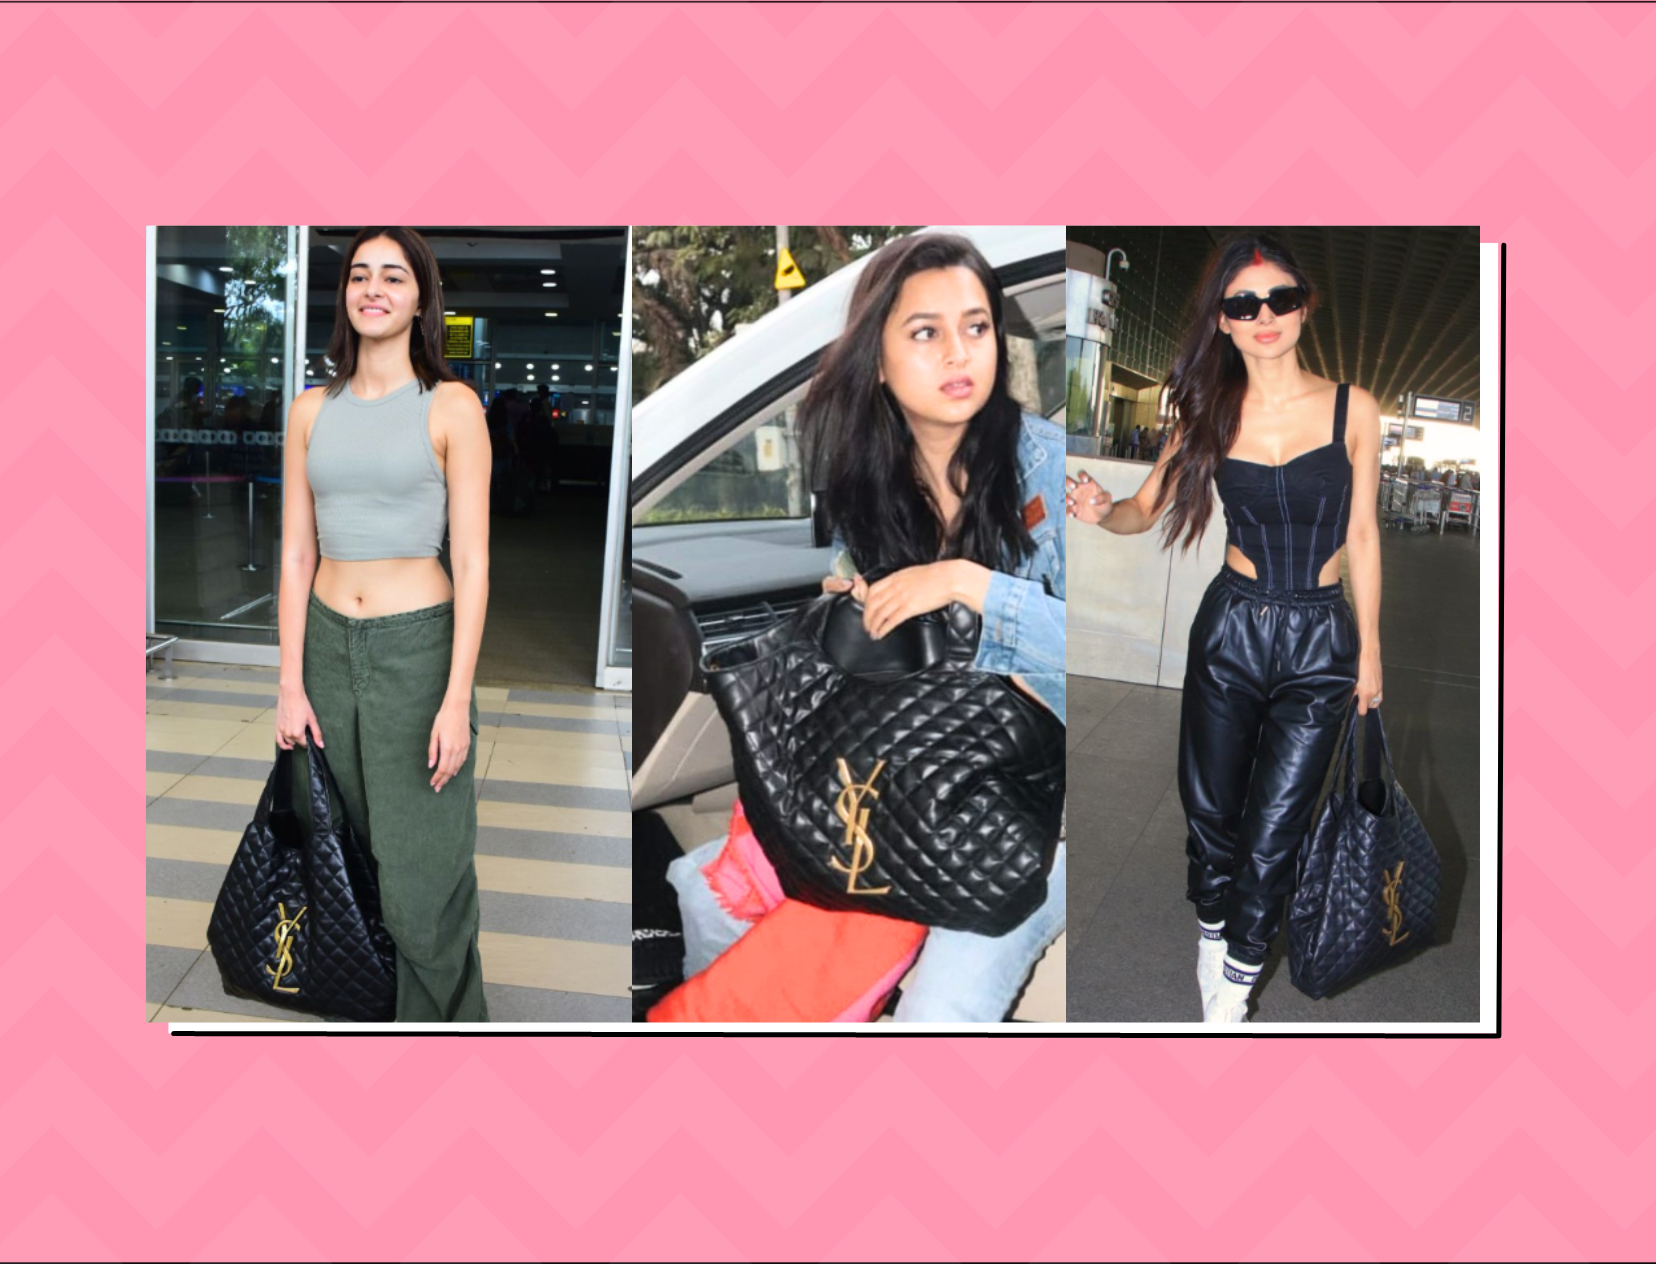 Are YSL Bags Worth it? The New YSL Icare Maxi Bag Might Just Be!